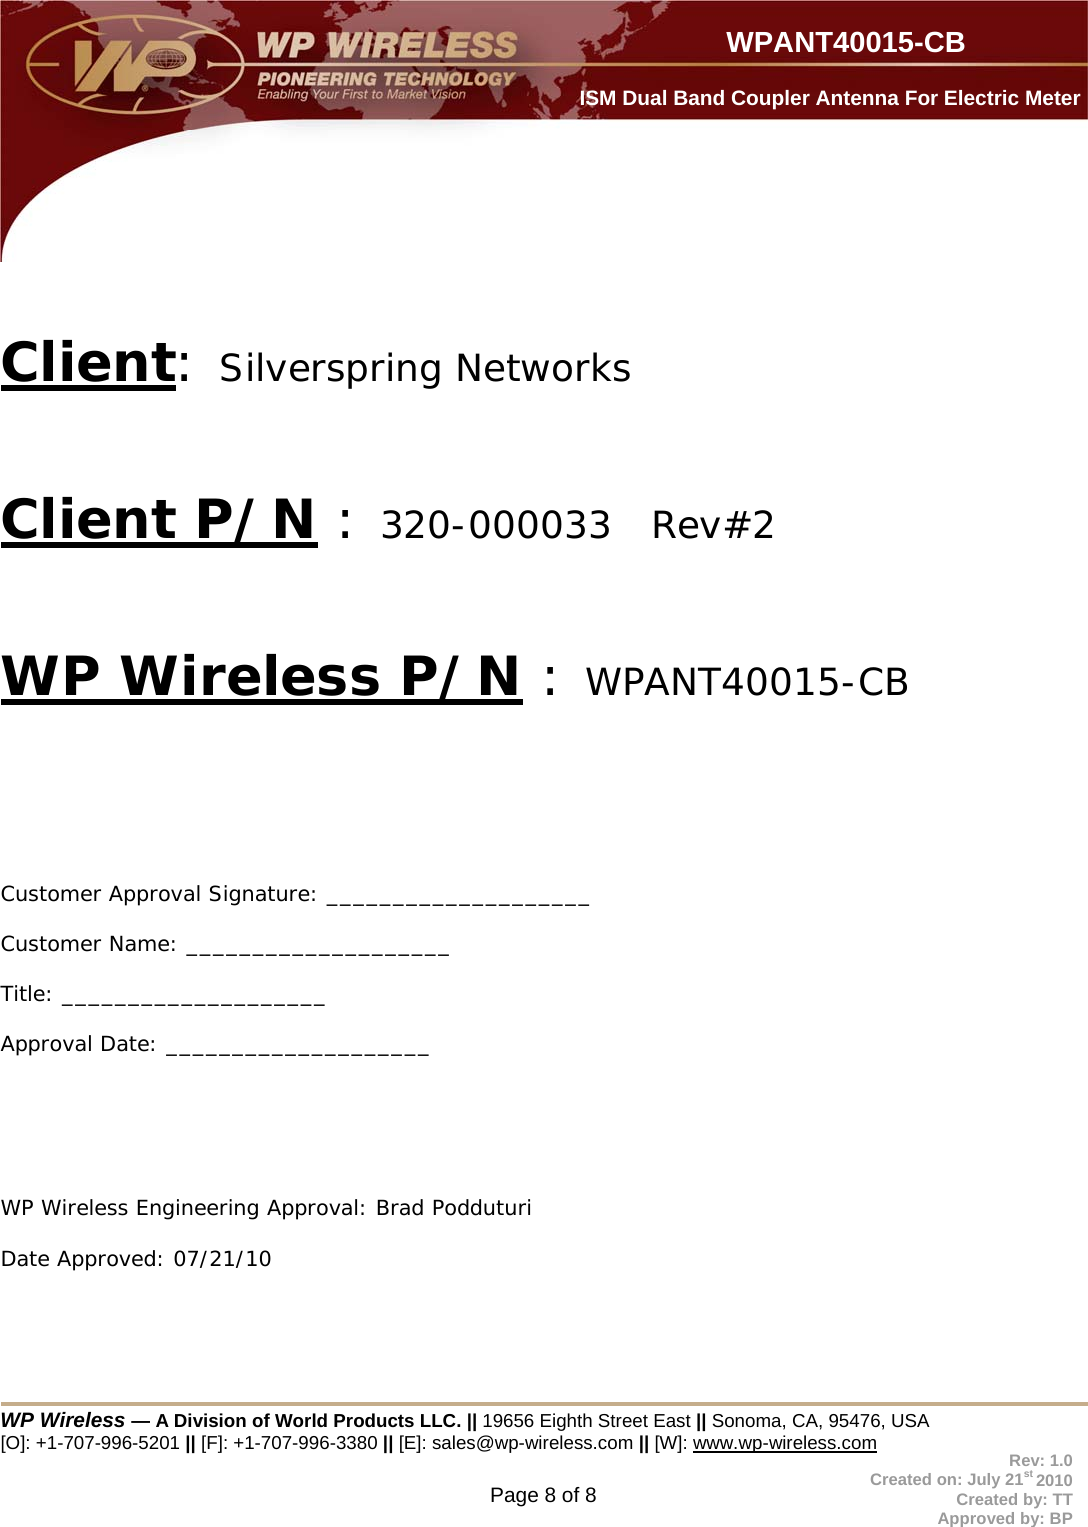  WP Wireless — A Division of World Products LLC. || 19656 Eighth Street East || Sonoma, CA, 95476, USA [O]: +1-707-996-5201 || [F]: +1-707-996-3380 || [E]: sales@wp-wireless.com || [W]: www.wp-wireless.com Page 8 of 8                     WPANT40015-CB Rev: 1.0 Created on: July 21st 2010 Created by: TT Approved by: BP  ISM Dual Band Coupler Antenna For Electric Meter  Client: Silverspring Networks   Client P/N : 320-000033   Rev#2   WP Wireless P/N : WPANT40015-CB     Customer Approval Signature: ____________________ Customer Name: ____________________  Title: ____________________ Approval Date: ____________________      WP Wireless Engineering Approval: Brad Podduturi        Date Approved: 07/21/10   